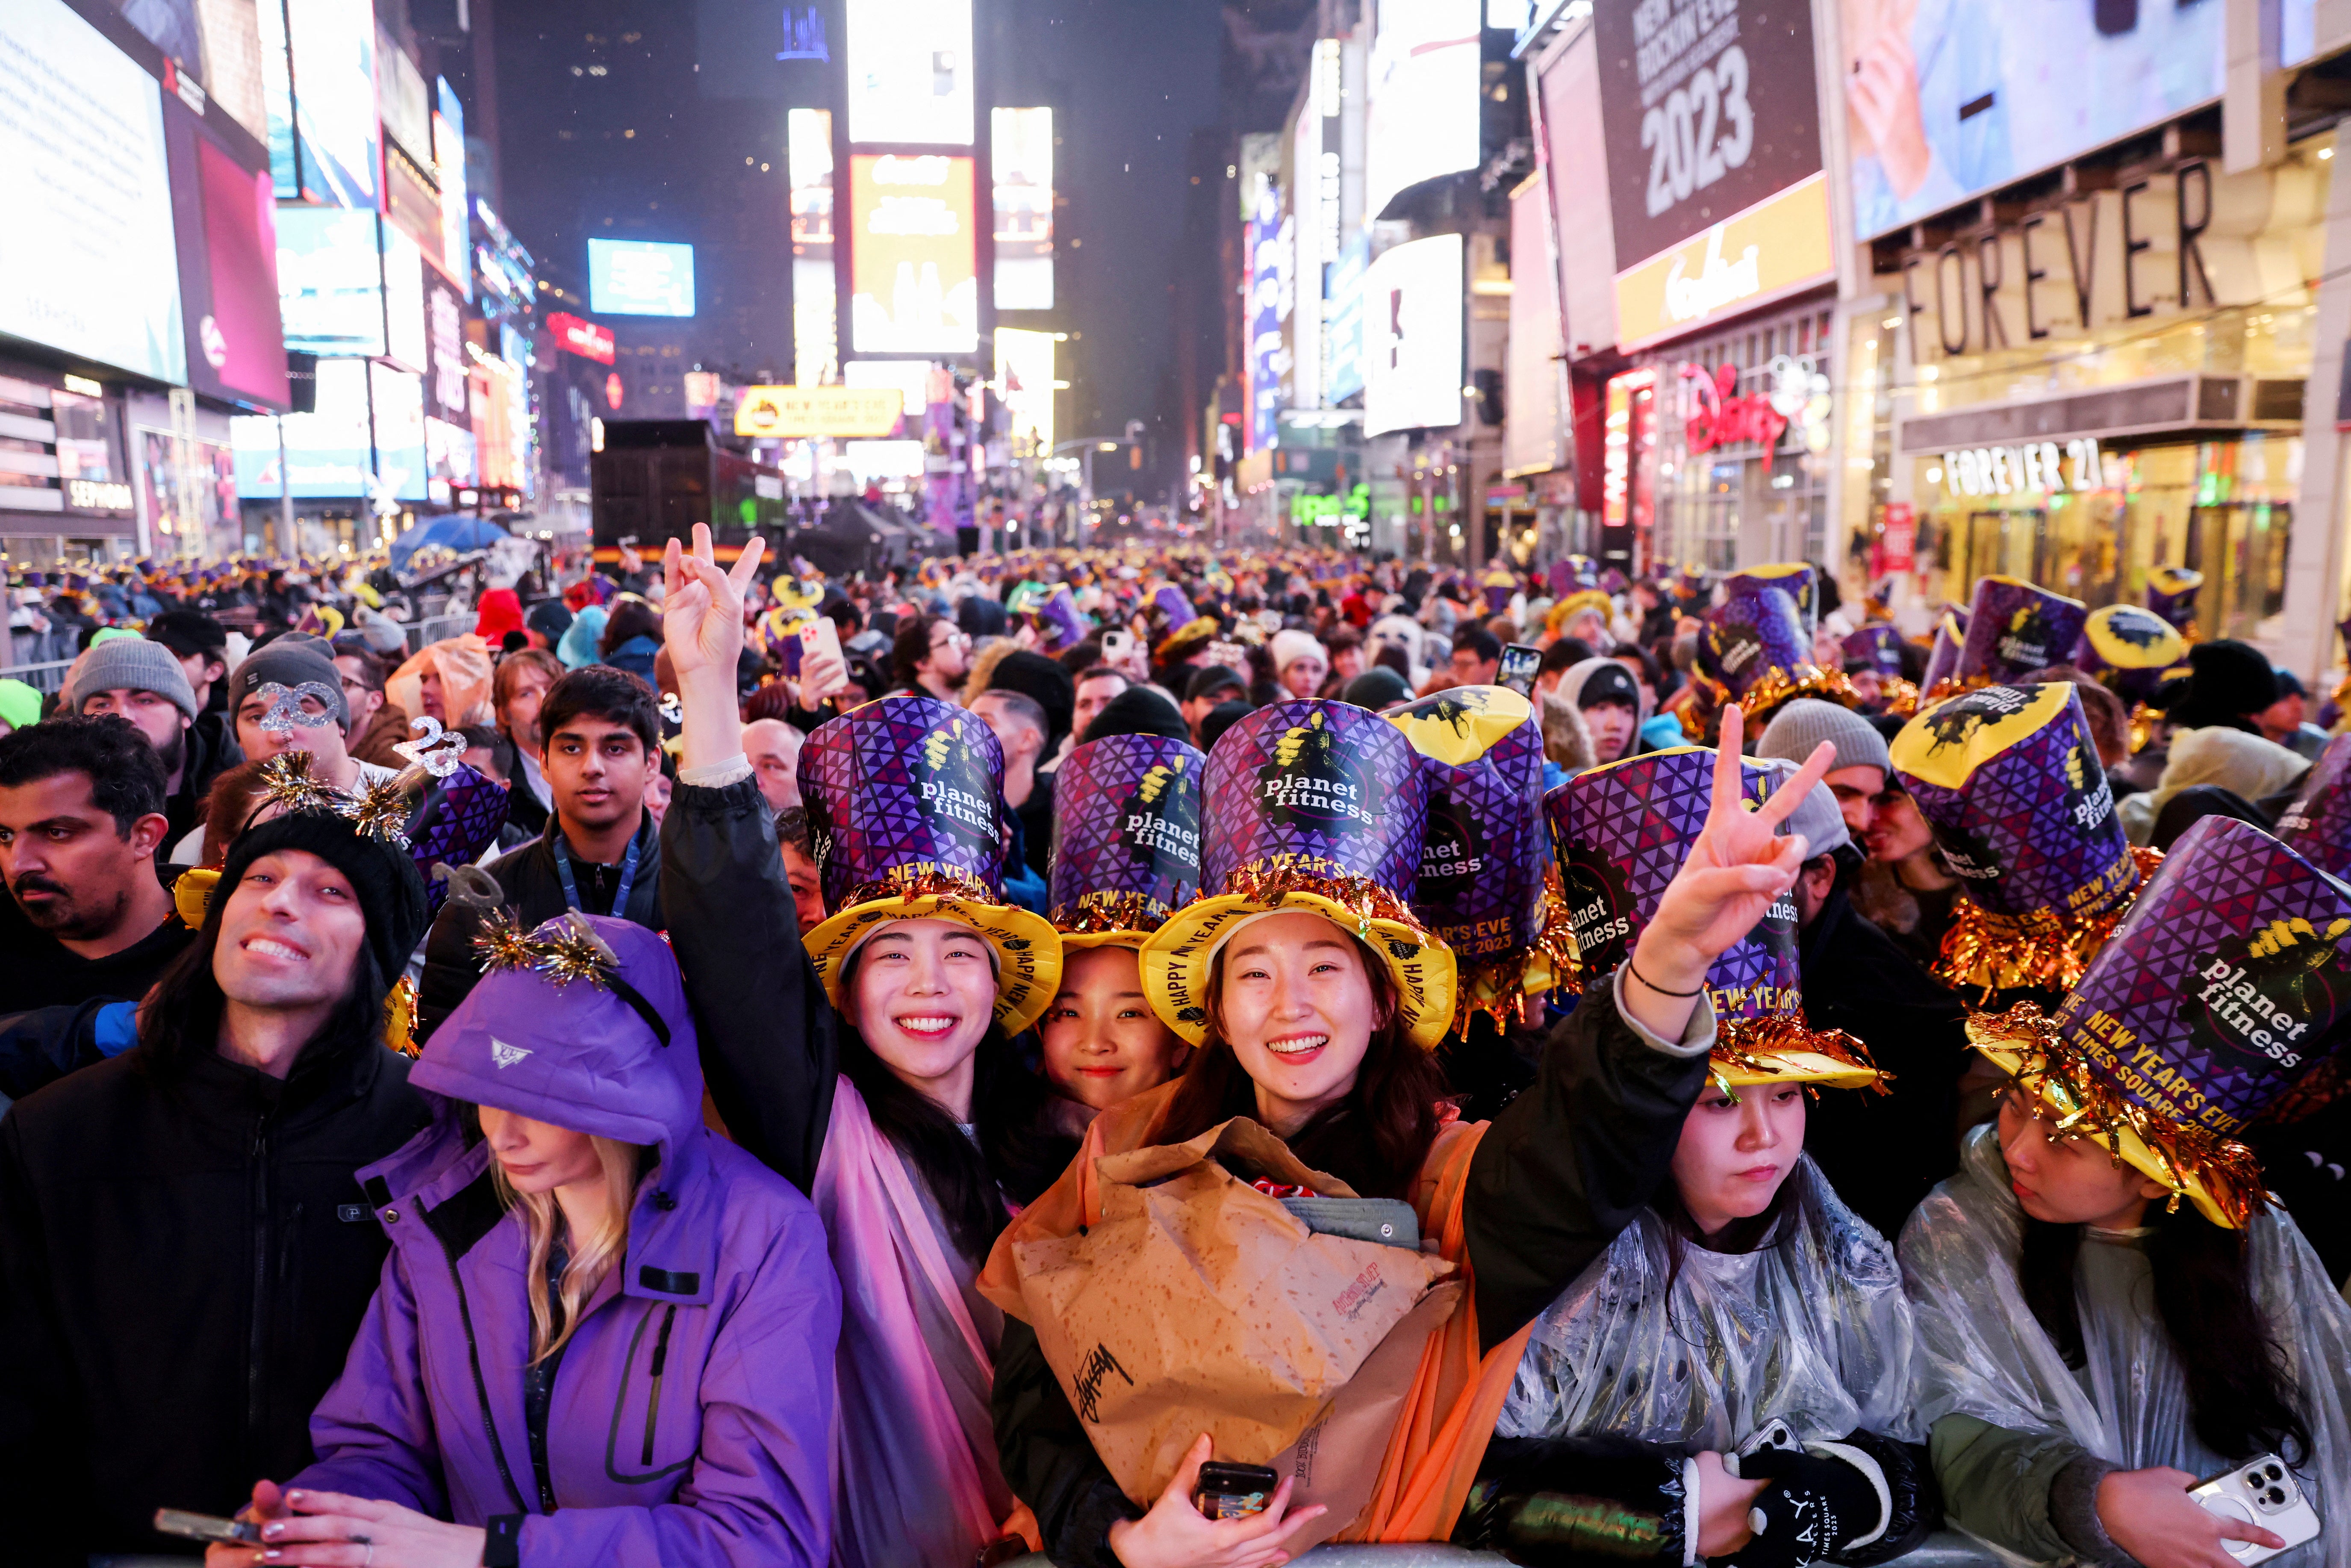 Revelers celebrate New Year’s Eve in Times Square, New York City